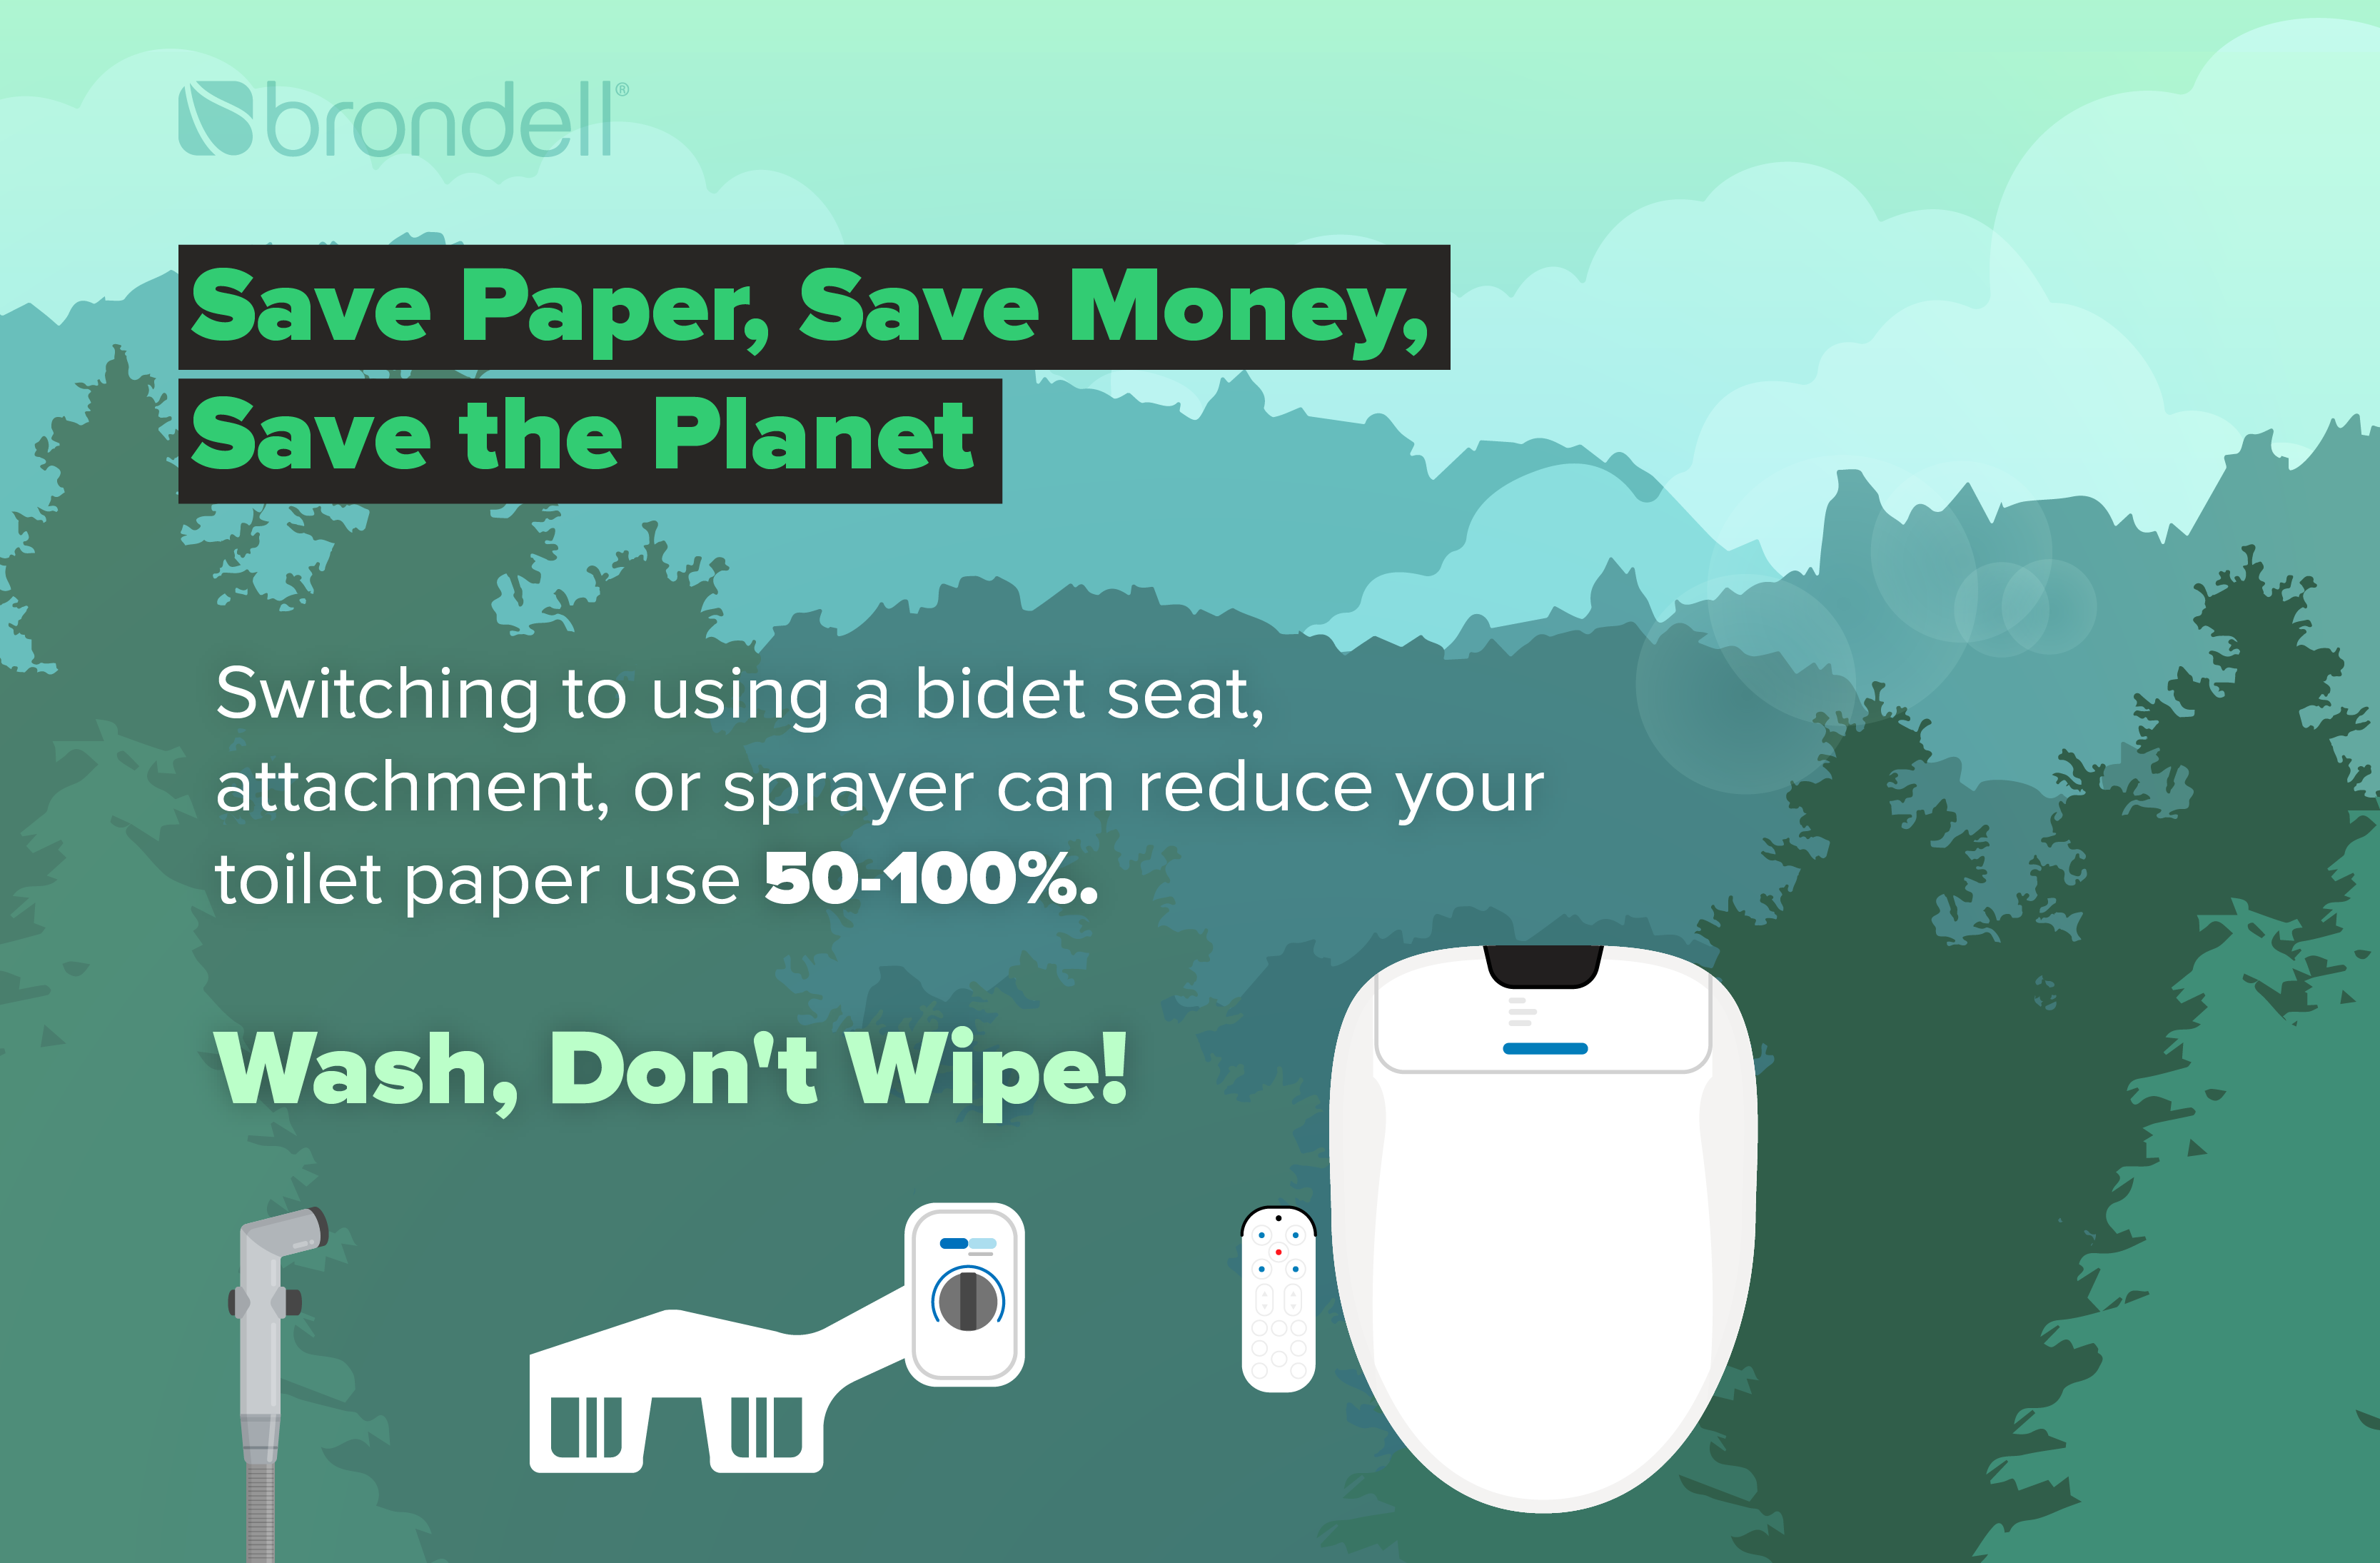 Bidet infographic of how switching to a bidet toilet seat can help reduce toilet paper use and effects on the environment